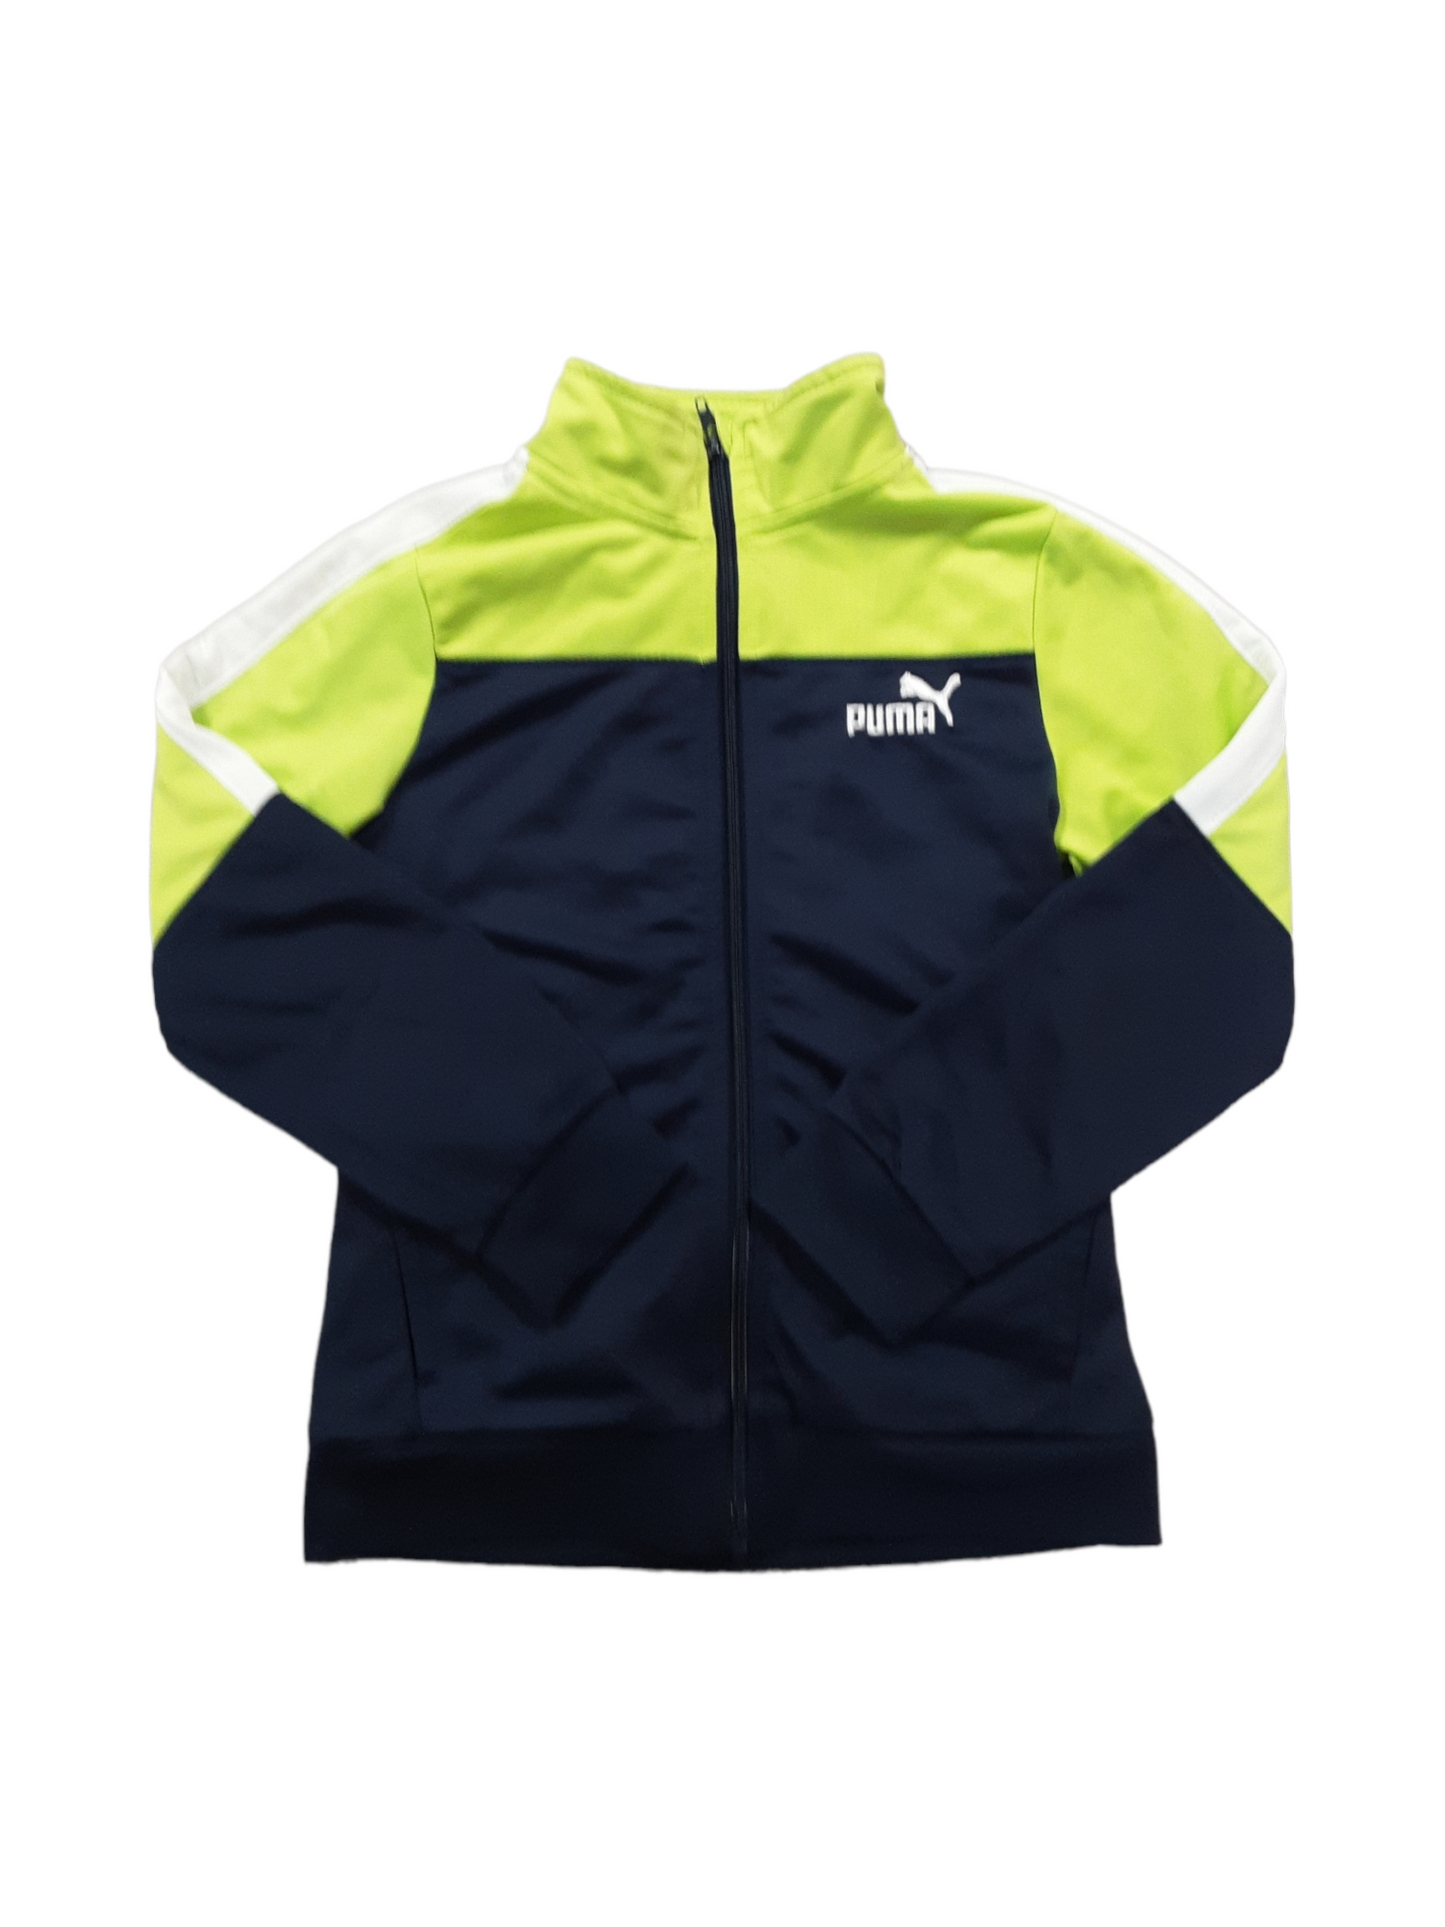 Lime and navy zip up- size 7